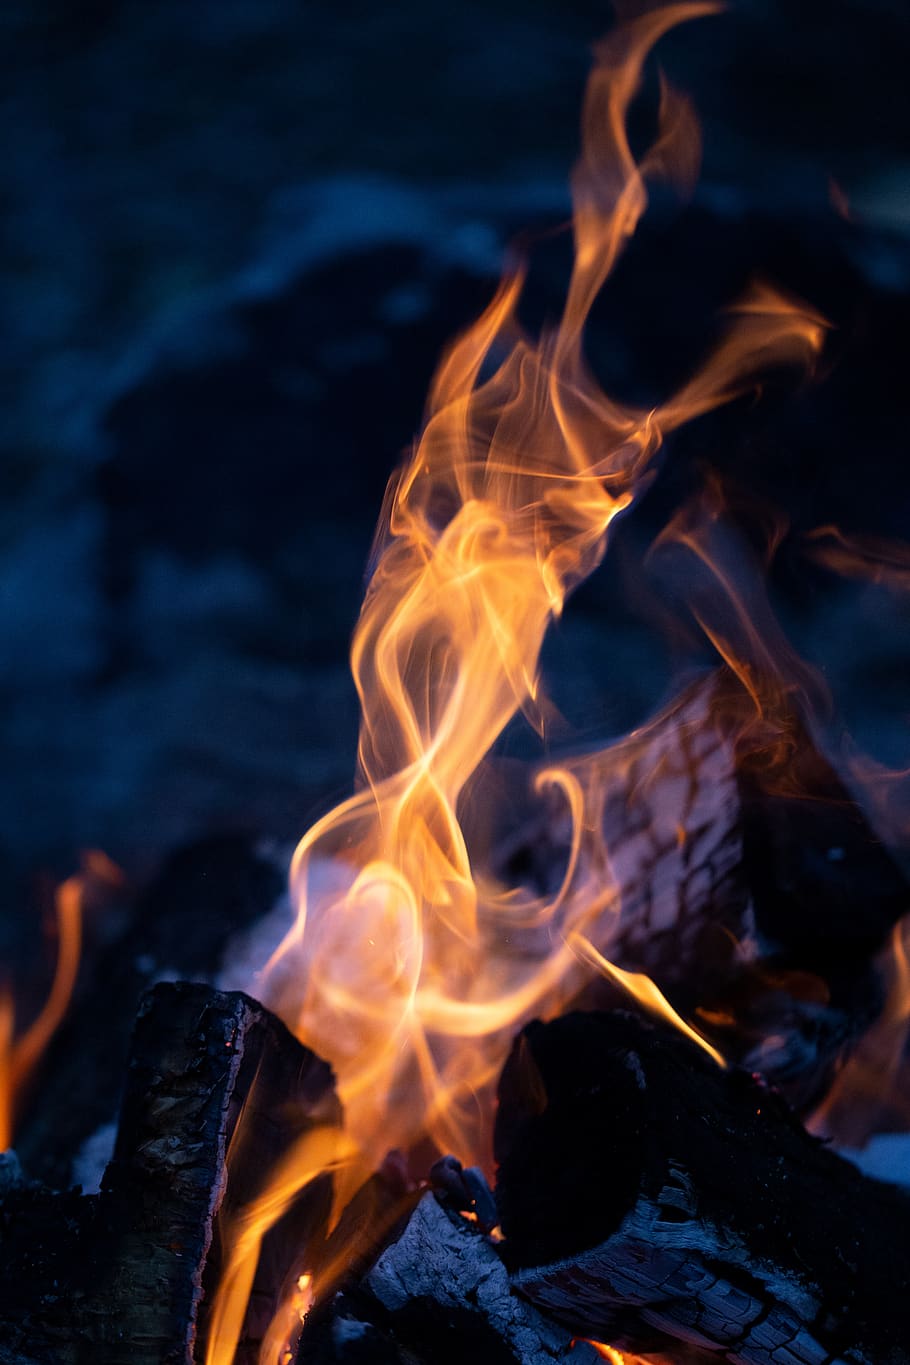 camp, fire, wood, nature, hot, orange, yellow, night, outdoors, flames